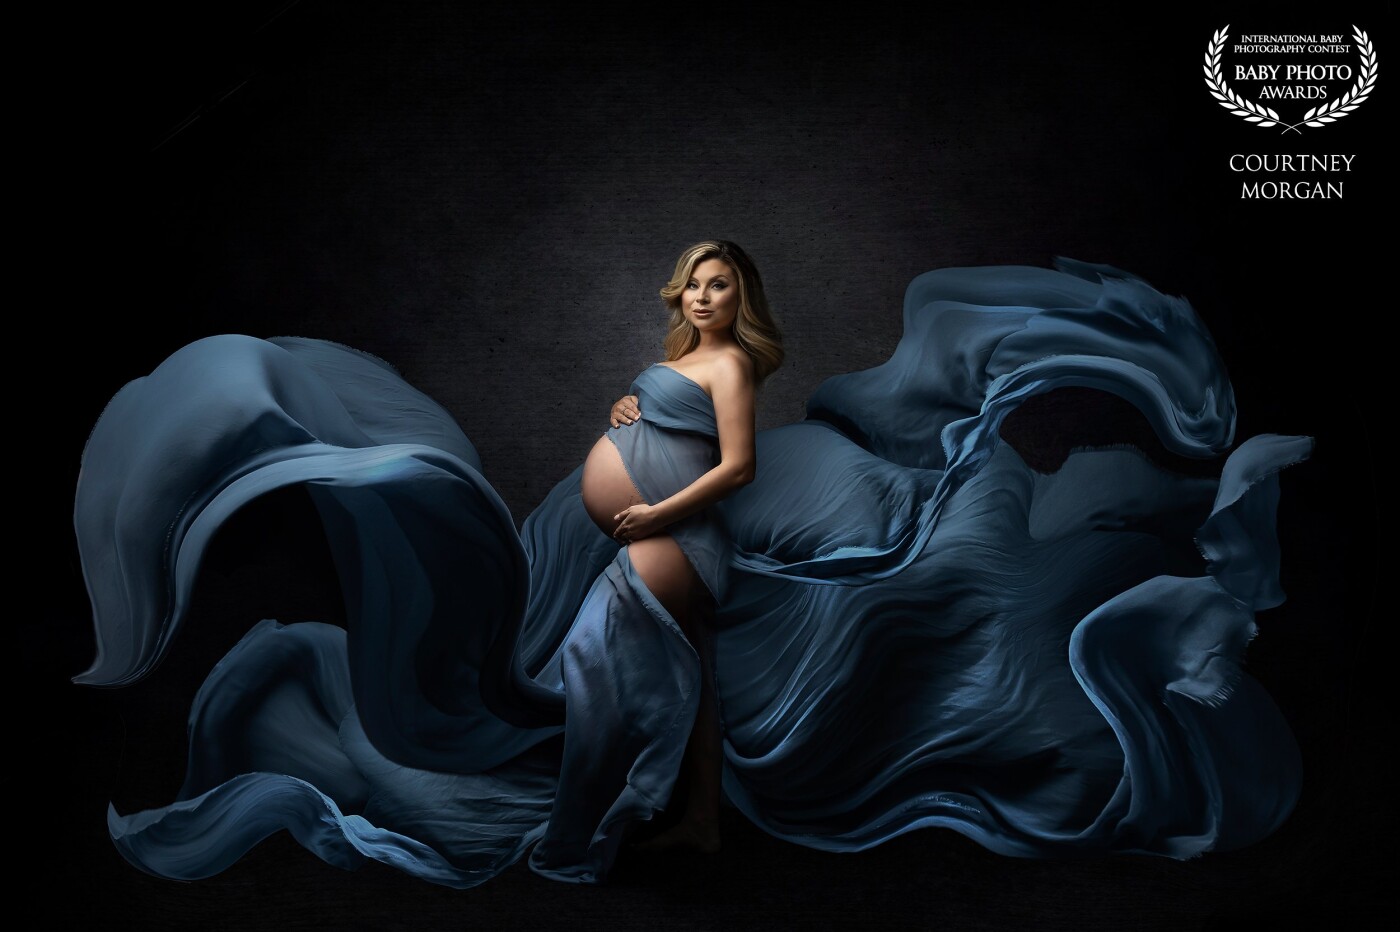 Power, beauty, and grace.  All wrapped up in one. Becoming a mother is a beautiful experience.  There's something powerful knowing that you grew another human and brought them into this world.  Then having the privilege of watching them grow and develop into their own individual.  There's no greater gift.